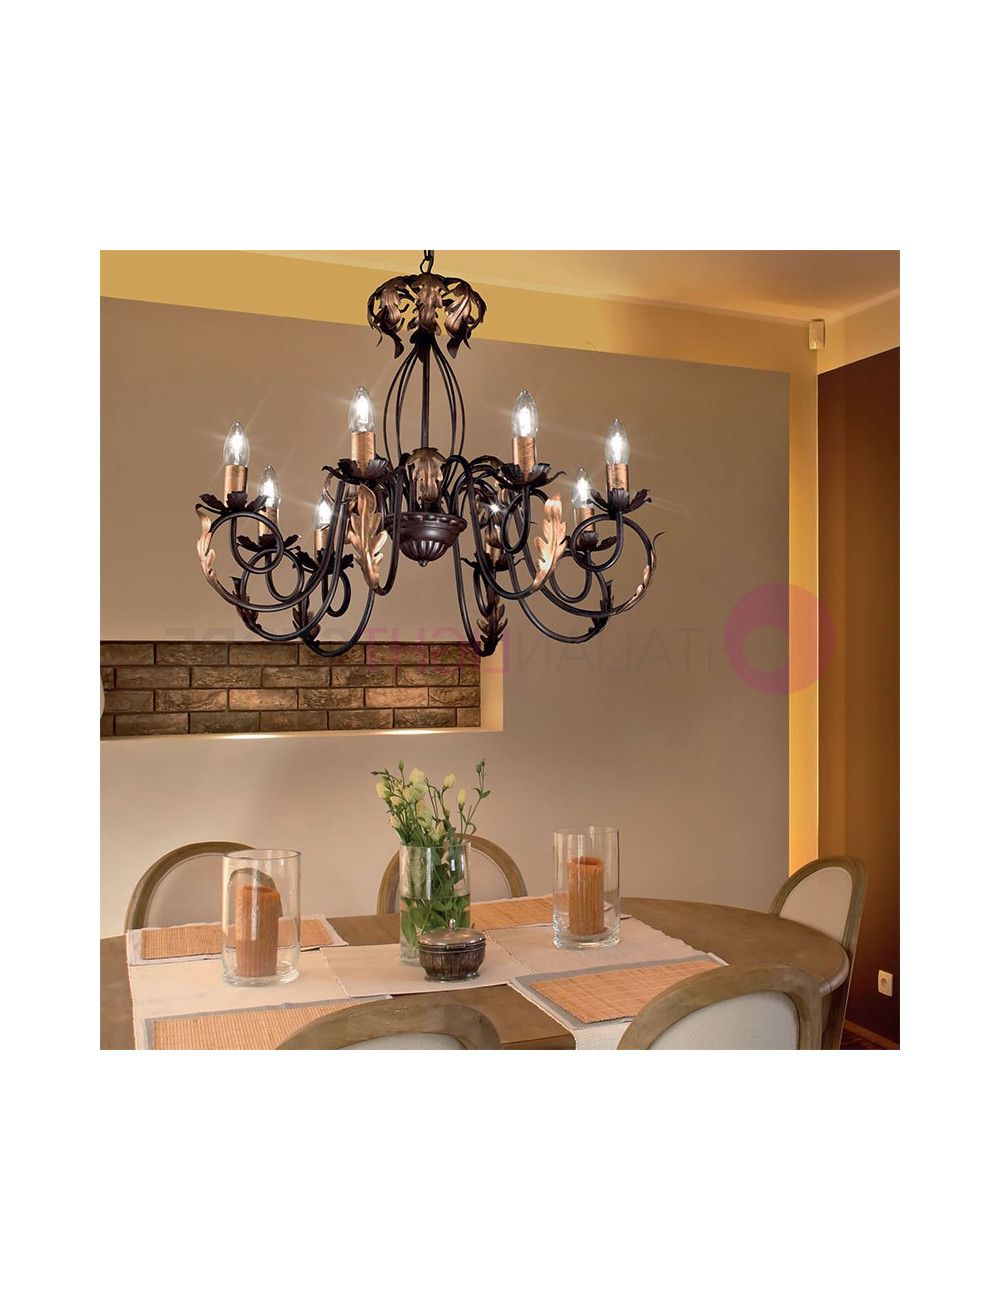 2020 Rusty Gold Chandeliers Intended For Lucy Classic Style Chandelier 8 Lights (View 9 of 15)